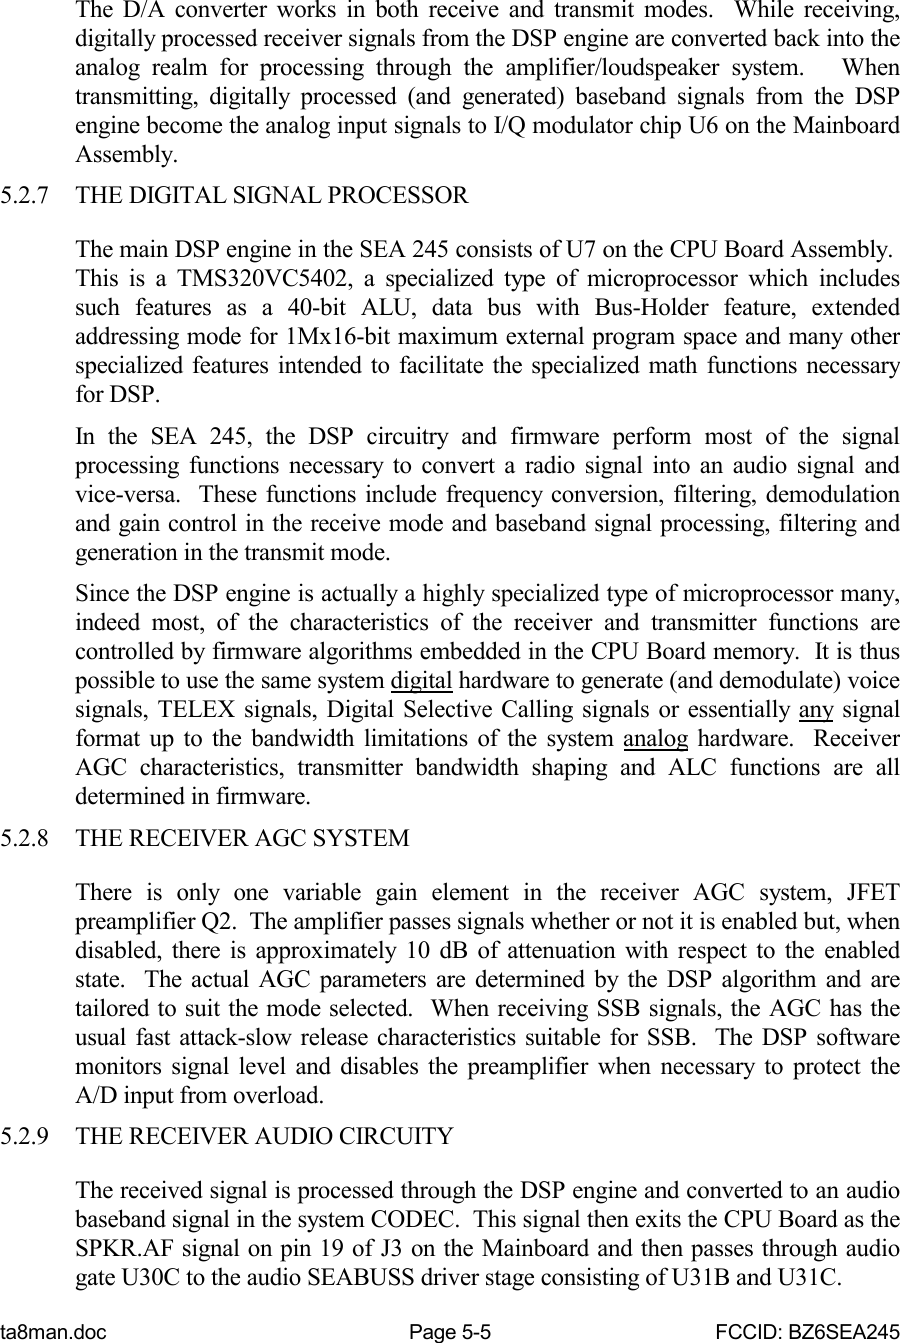 ta8man.doc Page 5-5 FCCID: BZ6SEA245The D/A converter works in both receive and transmit modes.  While receiving,digitally processed receiver signals from the DSP engine are converted back into theanalog realm for processing through the amplifier/loudspeaker system.   Whentransmitting, digitally processed (and generated) baseband signals from the DSPengine become the analog input signals to I/Q modulator chip U6 on the MainboardAssembly.5.2.7 THE DIGITAL SIGNAL PROCESSORThe main DSP engine in the SEA 245 consists of U7 on the CPU Board Assembly. This is a TMS320VC5402, a specialized type of microprocessor which includessuch features as a 40-bit ALU, data bus with Bus-Holder feature, extendedaddressing mode for 1Mx16-bit maximum external program space and many otherspecialized features intended to facilitate the specialized math functions necessaryfor DSP.In the SEA 245, the DSP circuitry and firmware perform most of the signalprocessing functions necessary to convert a radio signal into an audio signal andvice-versa.  These functions include frequency conversion, filtering, demodulationand gain control in the receive mode and baseband signal processing, filtering andgeneration in the transmit mode.Since the DSP engine is actually a highly specialized type of microprocessor many,indeed most, of the characteristics of the receiver and transmitter functions arecontrolled by firmware algorithms embedded in the CPU Board memory.  It is thuspossible to use the same system digital hardware to generate (and demodulate) voicesignals, TELEX signals, Digital Selective Calling signals or essentially any signalformat up to the bandwidth limitations of the system analog hardware.  ReceiverAGC characteristics, transmitter bandwidth shaping and ALC functions are alldetermined in firmware.5.2.8 THE RECEIVER AGC SYSTEMThere is only one variable gain element in the receiver AGC system, JFETpreamplifier Q2.  The amplifier passes signals whether or not it is enabled but, whendisabled, there is approximately 10 dB of attenuation with respect to the enabledstate.  The actual AGC parameters are determined by the DSP algorithm and aretailored to suit the mode selected.  When receiving SSB signals, the AGC has theusual fast attack-slow release characteristics suitable for SSB.  The DSP softwaremonitors signal level and disables the preamplifier when necessary to protect theA/D input from overload.5.2.9 THE RECEIVER AUDIO CIRCUITYThe received signal is processed through the DSP engine and converted to an audiobaseband signal in the system CODEC.  This signal then exits the CPU Board as theSPKR.AF signal on pin 19 of J3 on the Mainboard and then passes through audiogate U30C to the audio SEABUSS driver stage consisting of U31B and U31C.